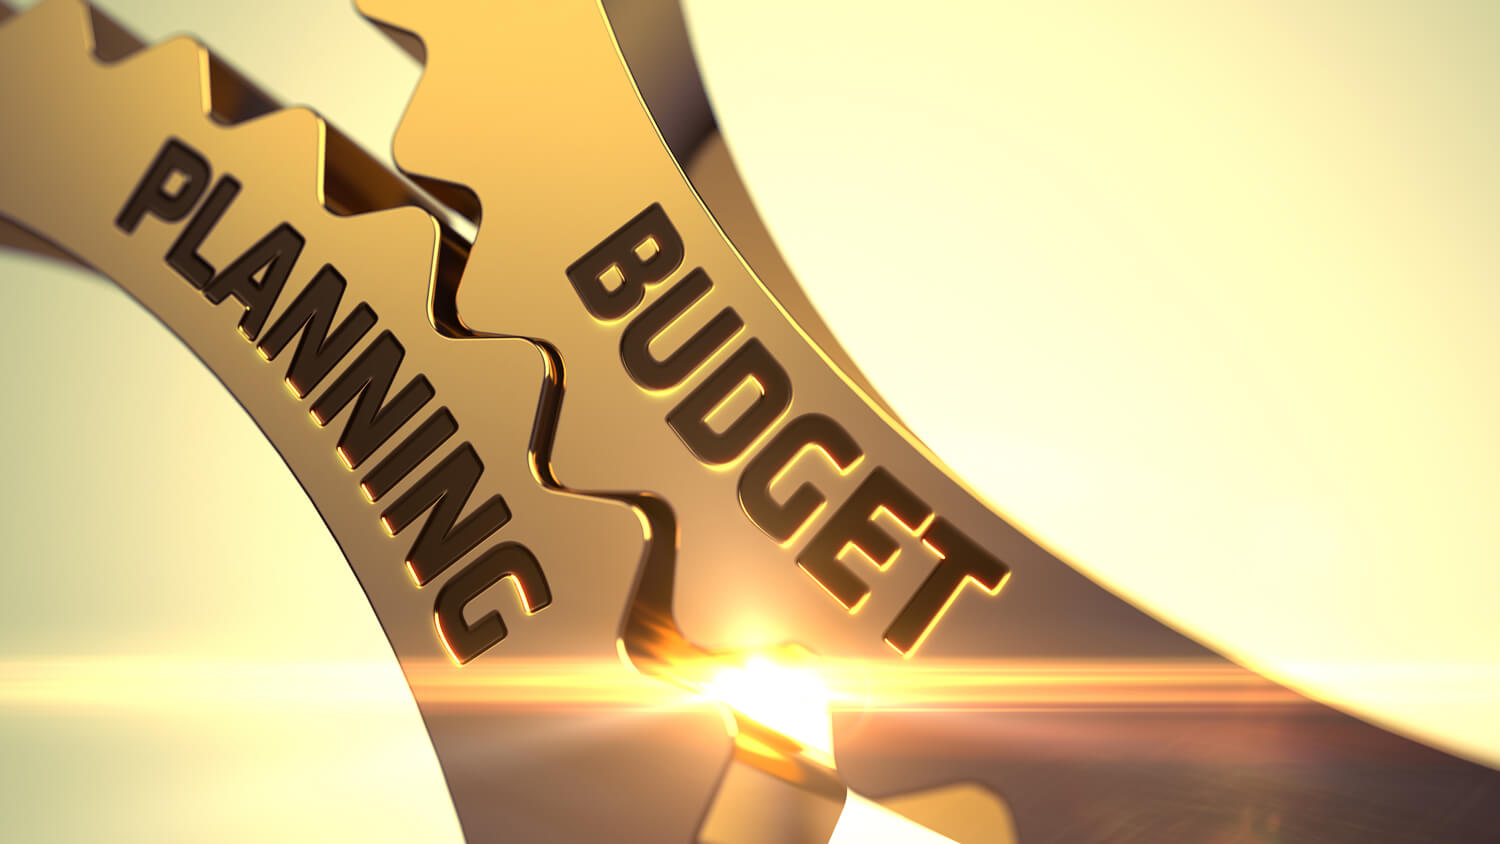 Budget Planning Cogs